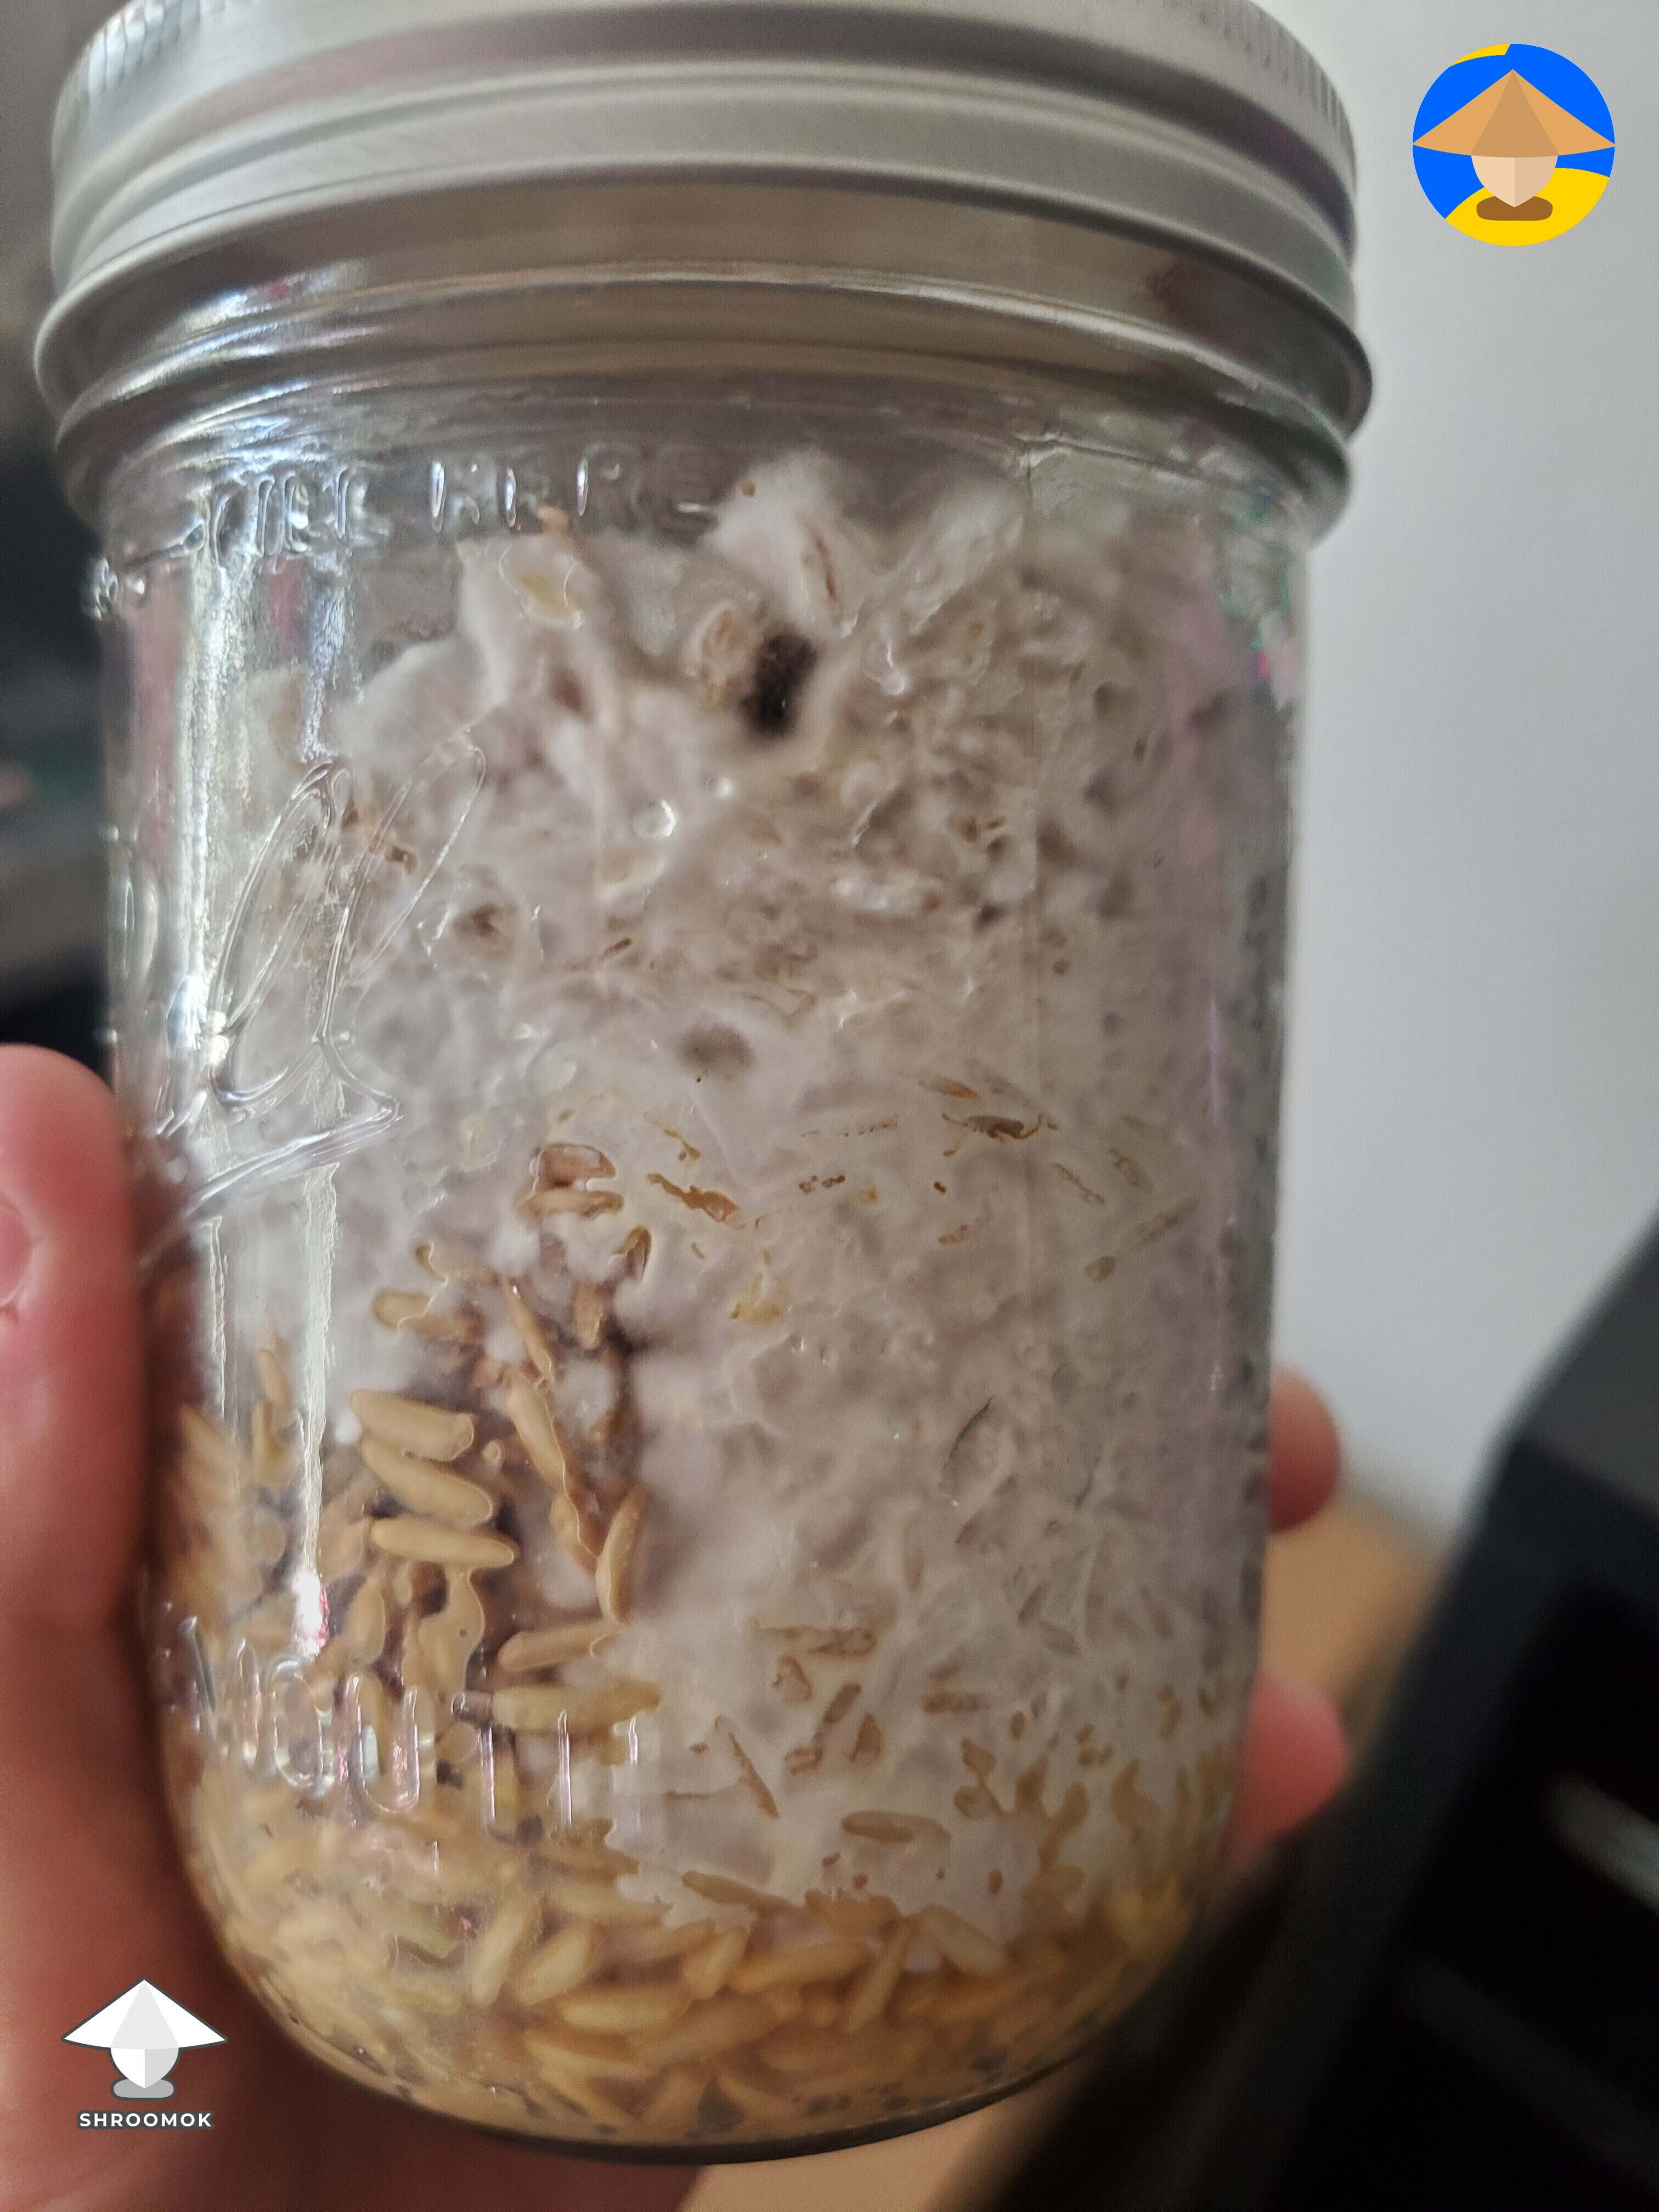 What are the chances this spawn jar survives those wet grains - answer ...